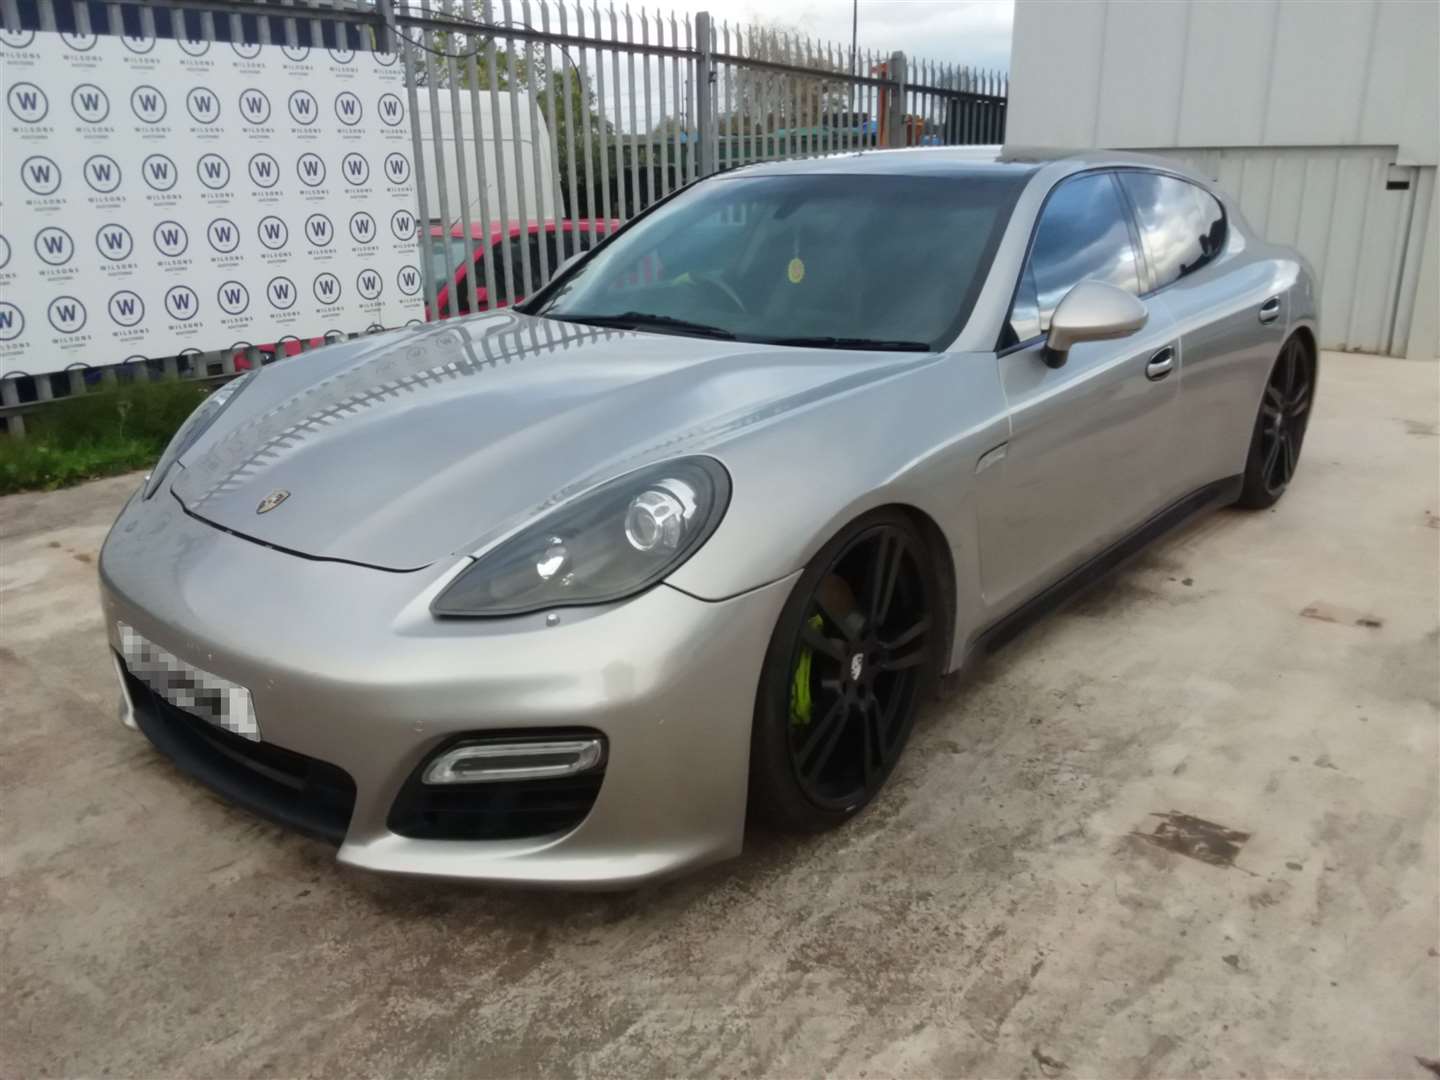 A fraudster had his Porsche seized after being spotted driving through Sheerness. Picture: Kent Police